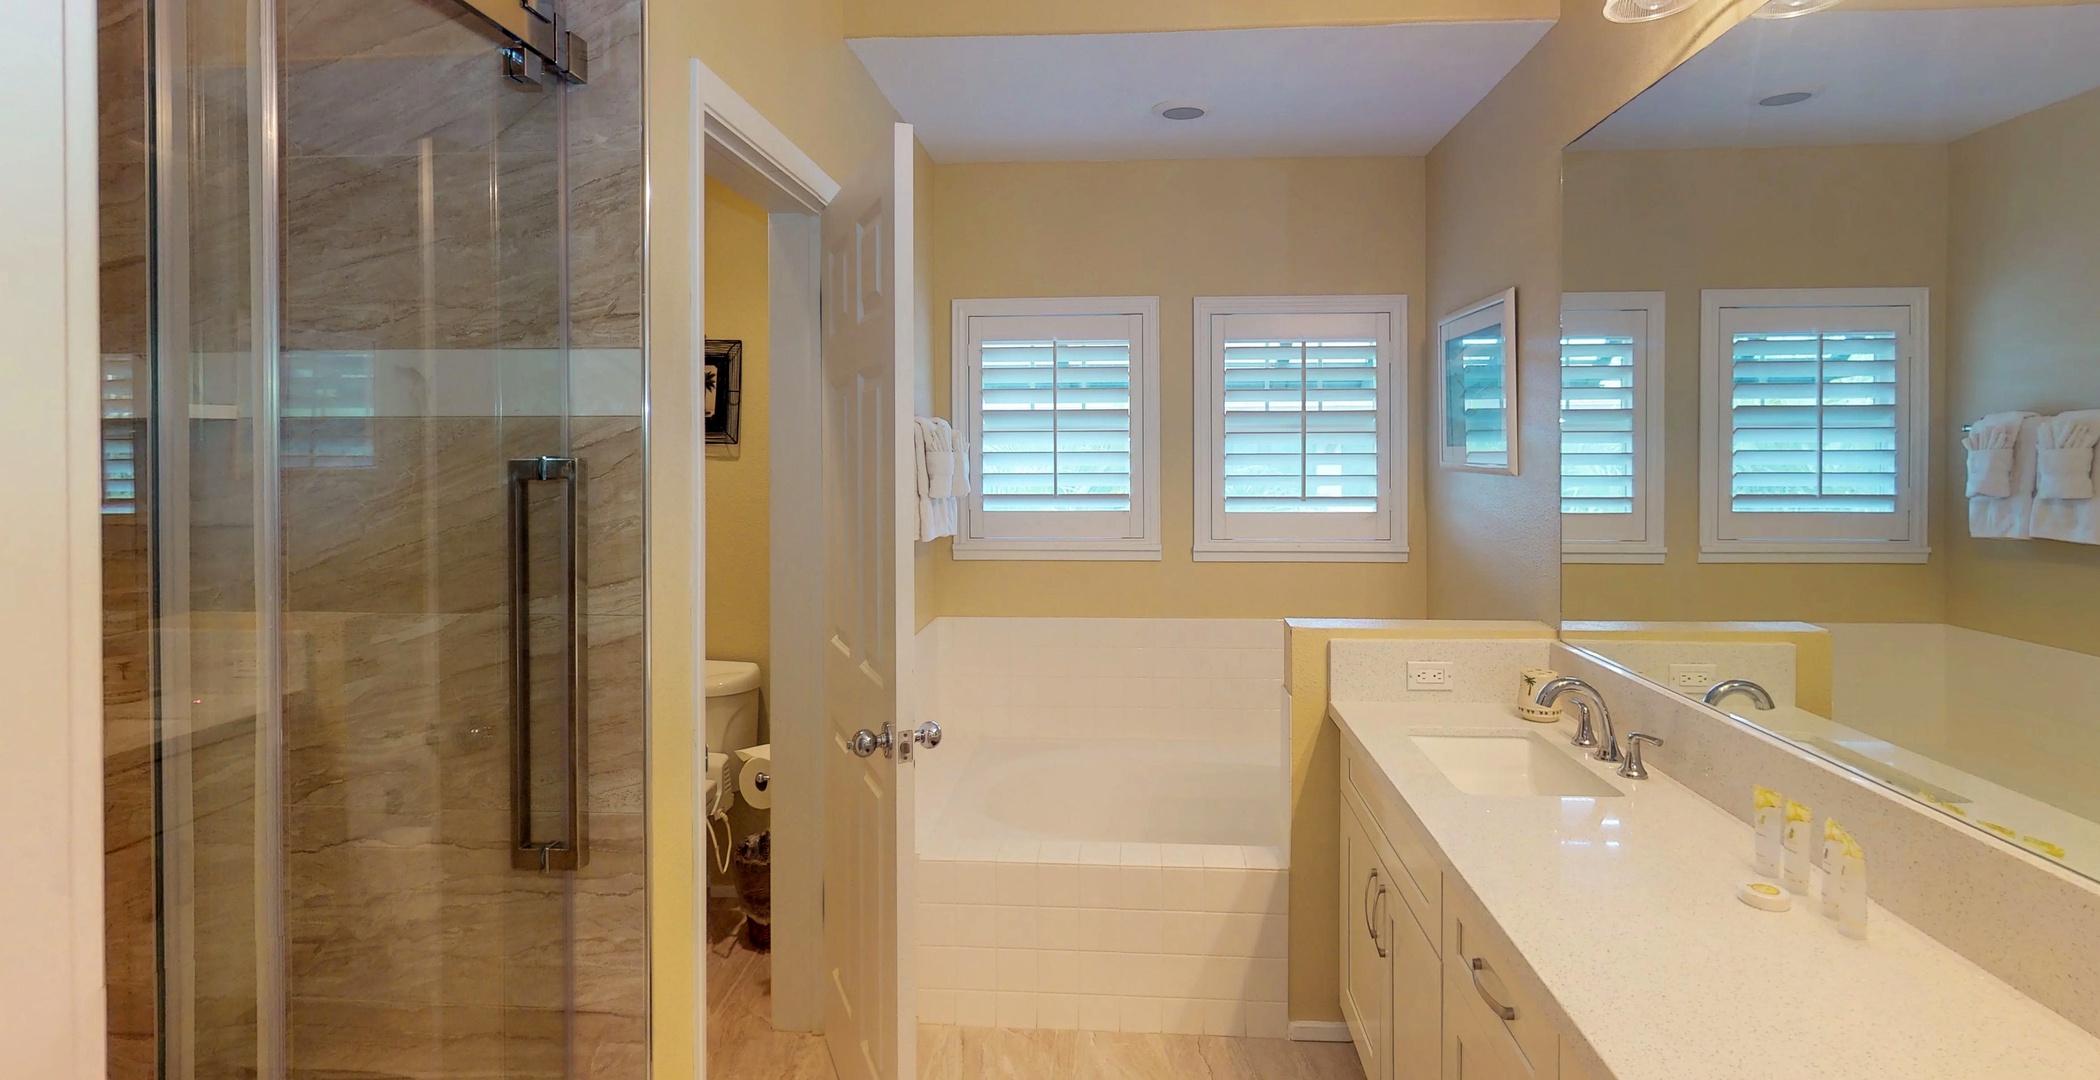 Kapolei Vacation Rentals, Coconut Plantation 1078-3 - The primary guest bathroom with a walk-in shower and bathtub.